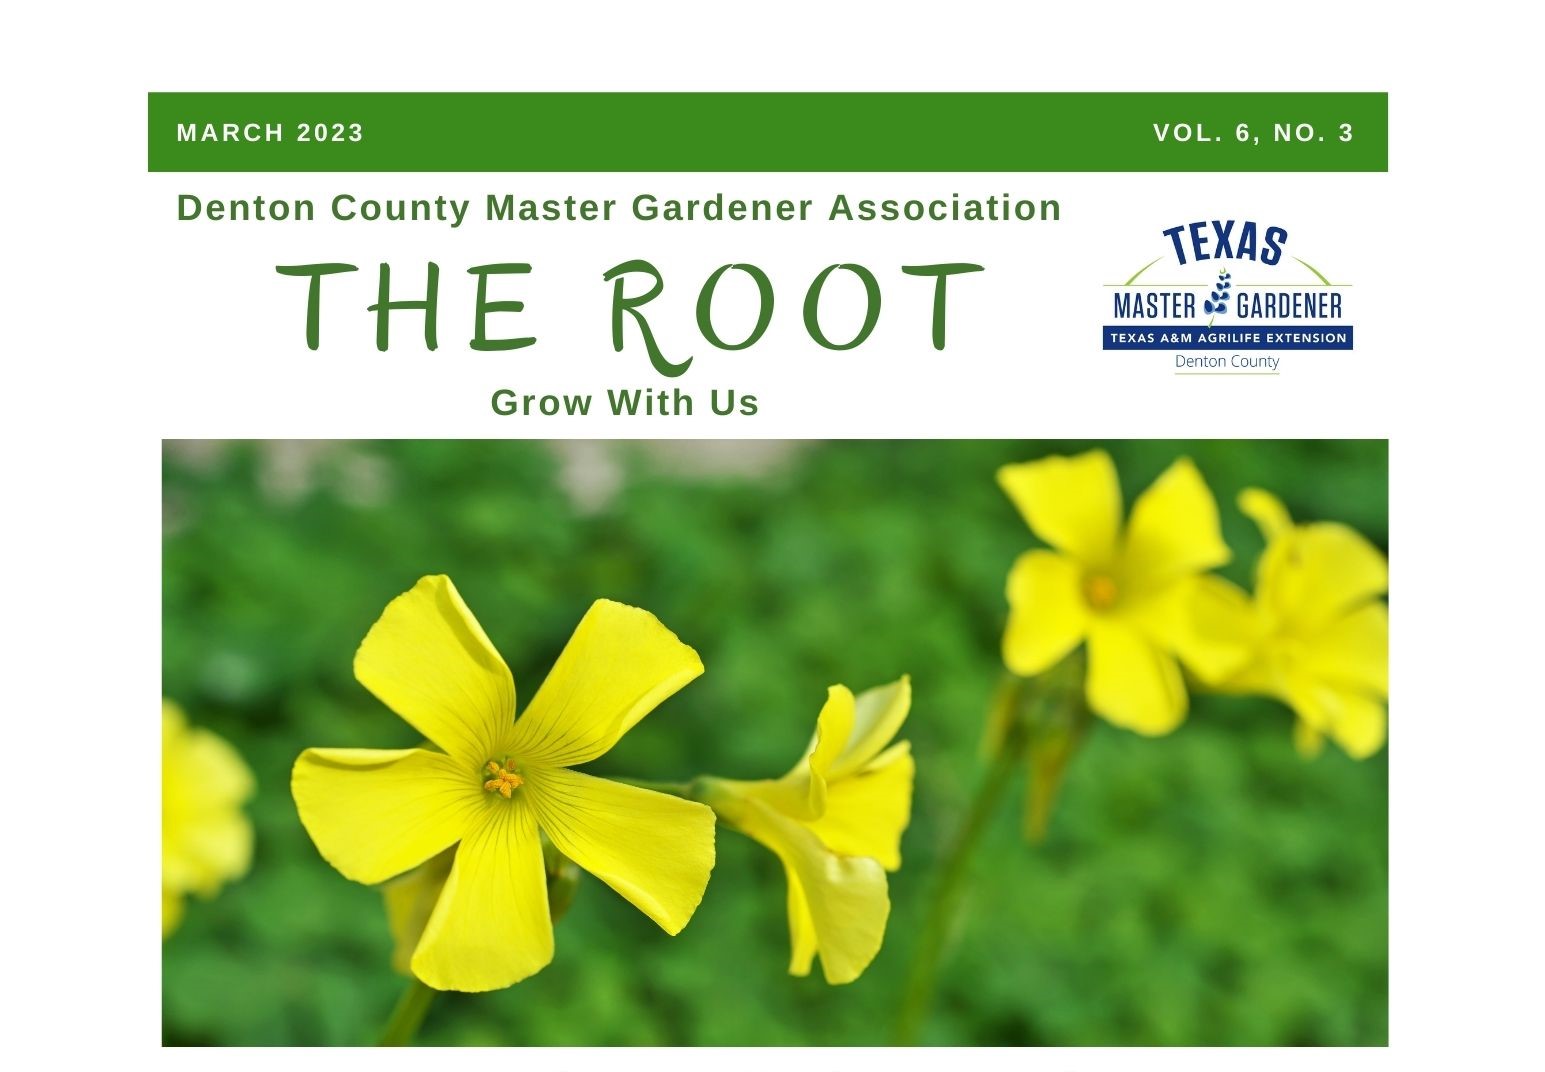 Cover of March 2023 issue of The Root, the free digital monthly gardening magazine published by the Denton County Master Gardener Association.